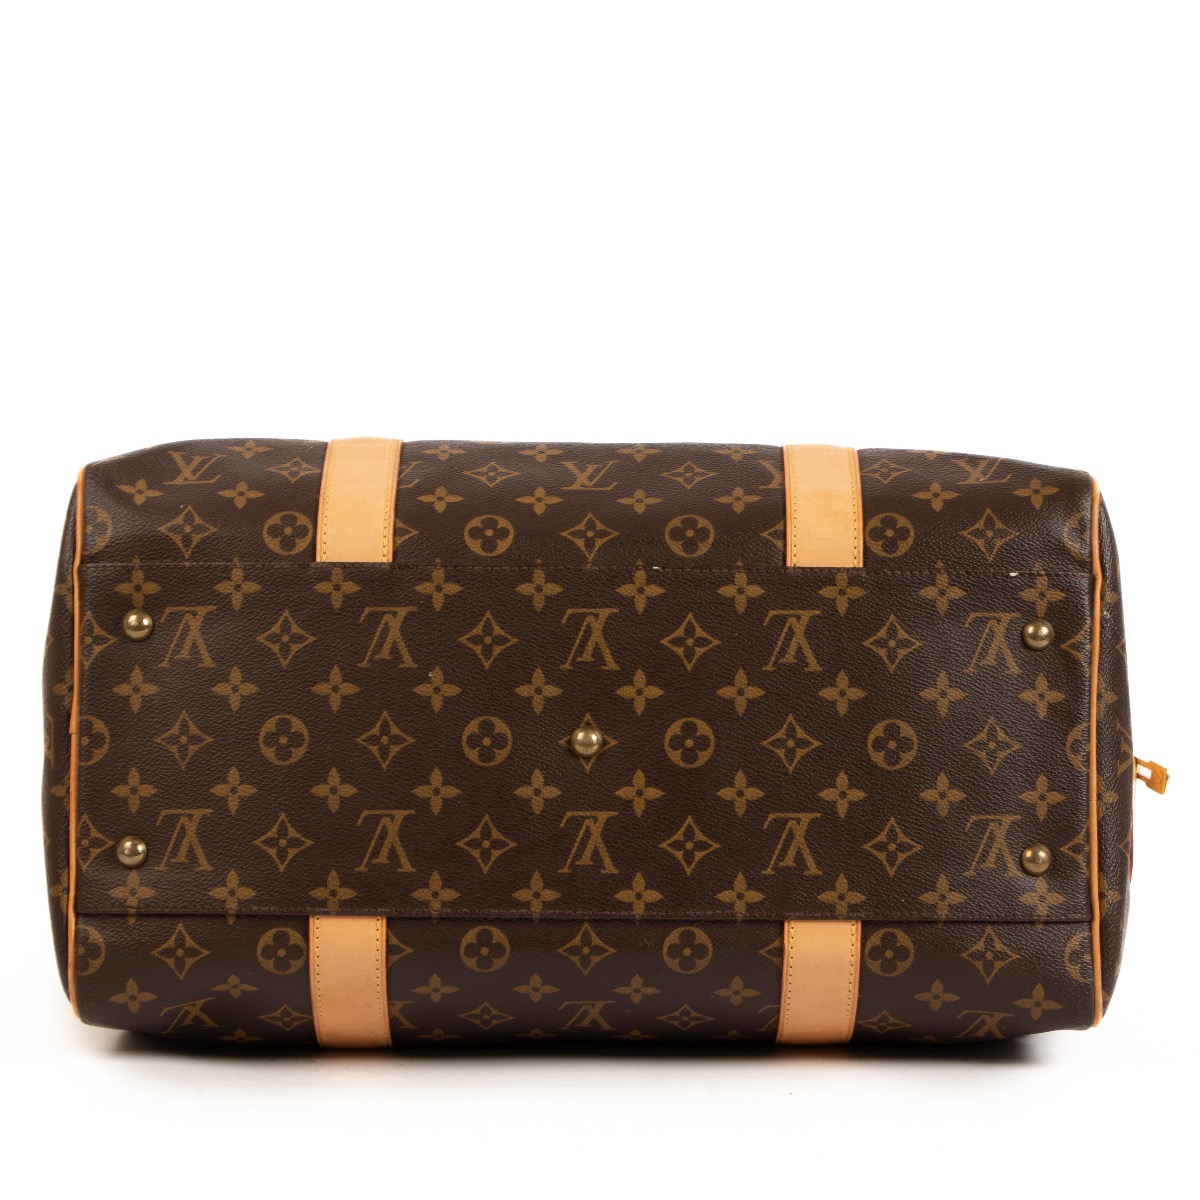 Authentic Louis Vuitton Monogram Carryall Travel Bag for Sale in